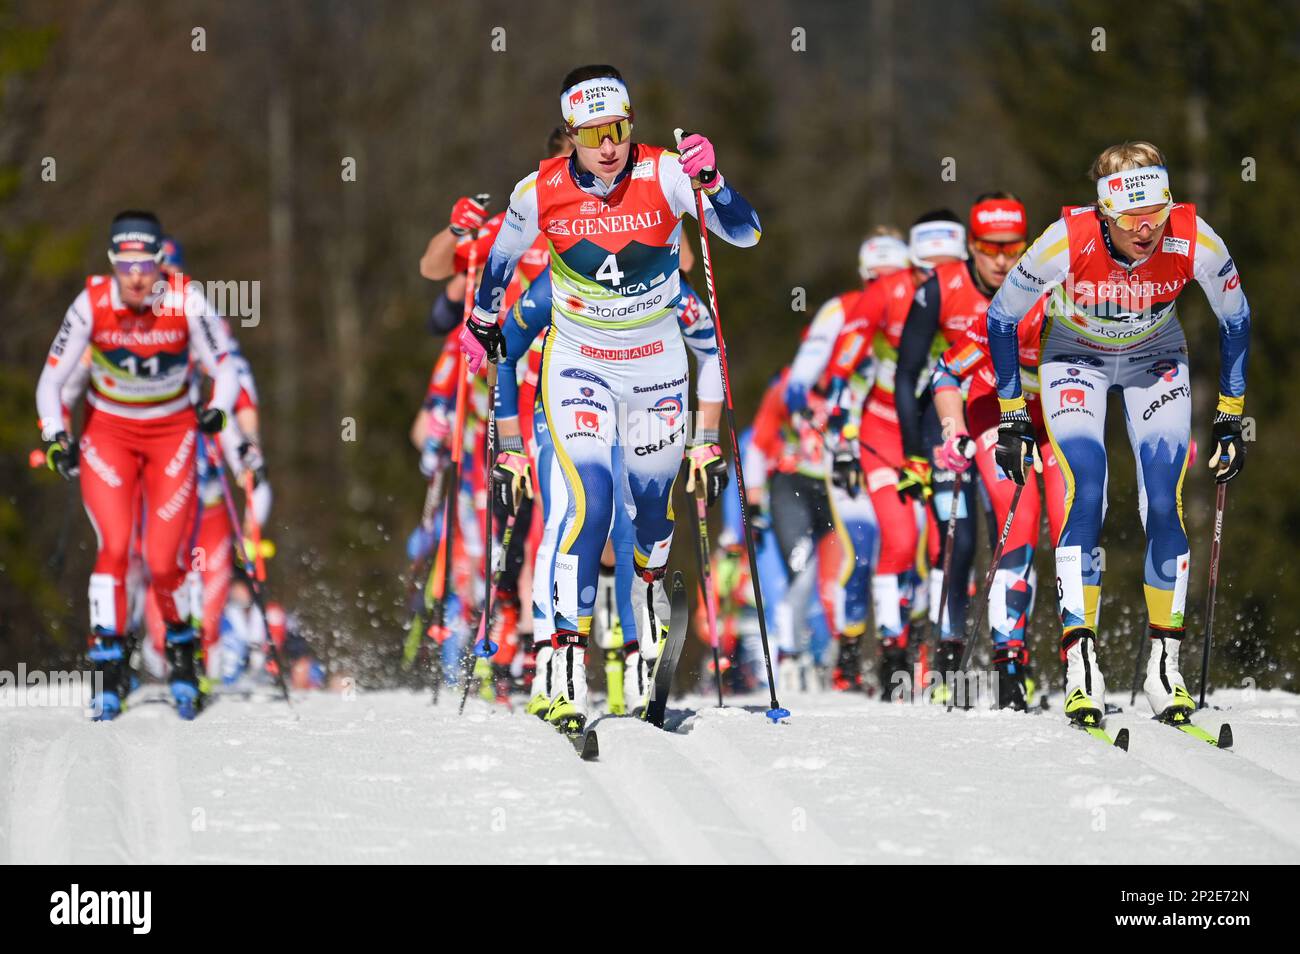 Planica, Slovenia. 4 March, 2023. Sweden's Ebba Andersson leads the women’s 30-kilometer classic race at the 2023 FIS World Nordic Ski Championships in Planica, Slovenia. She won the race. Credit: John Lazenby/Alamy Live News Stock Photo